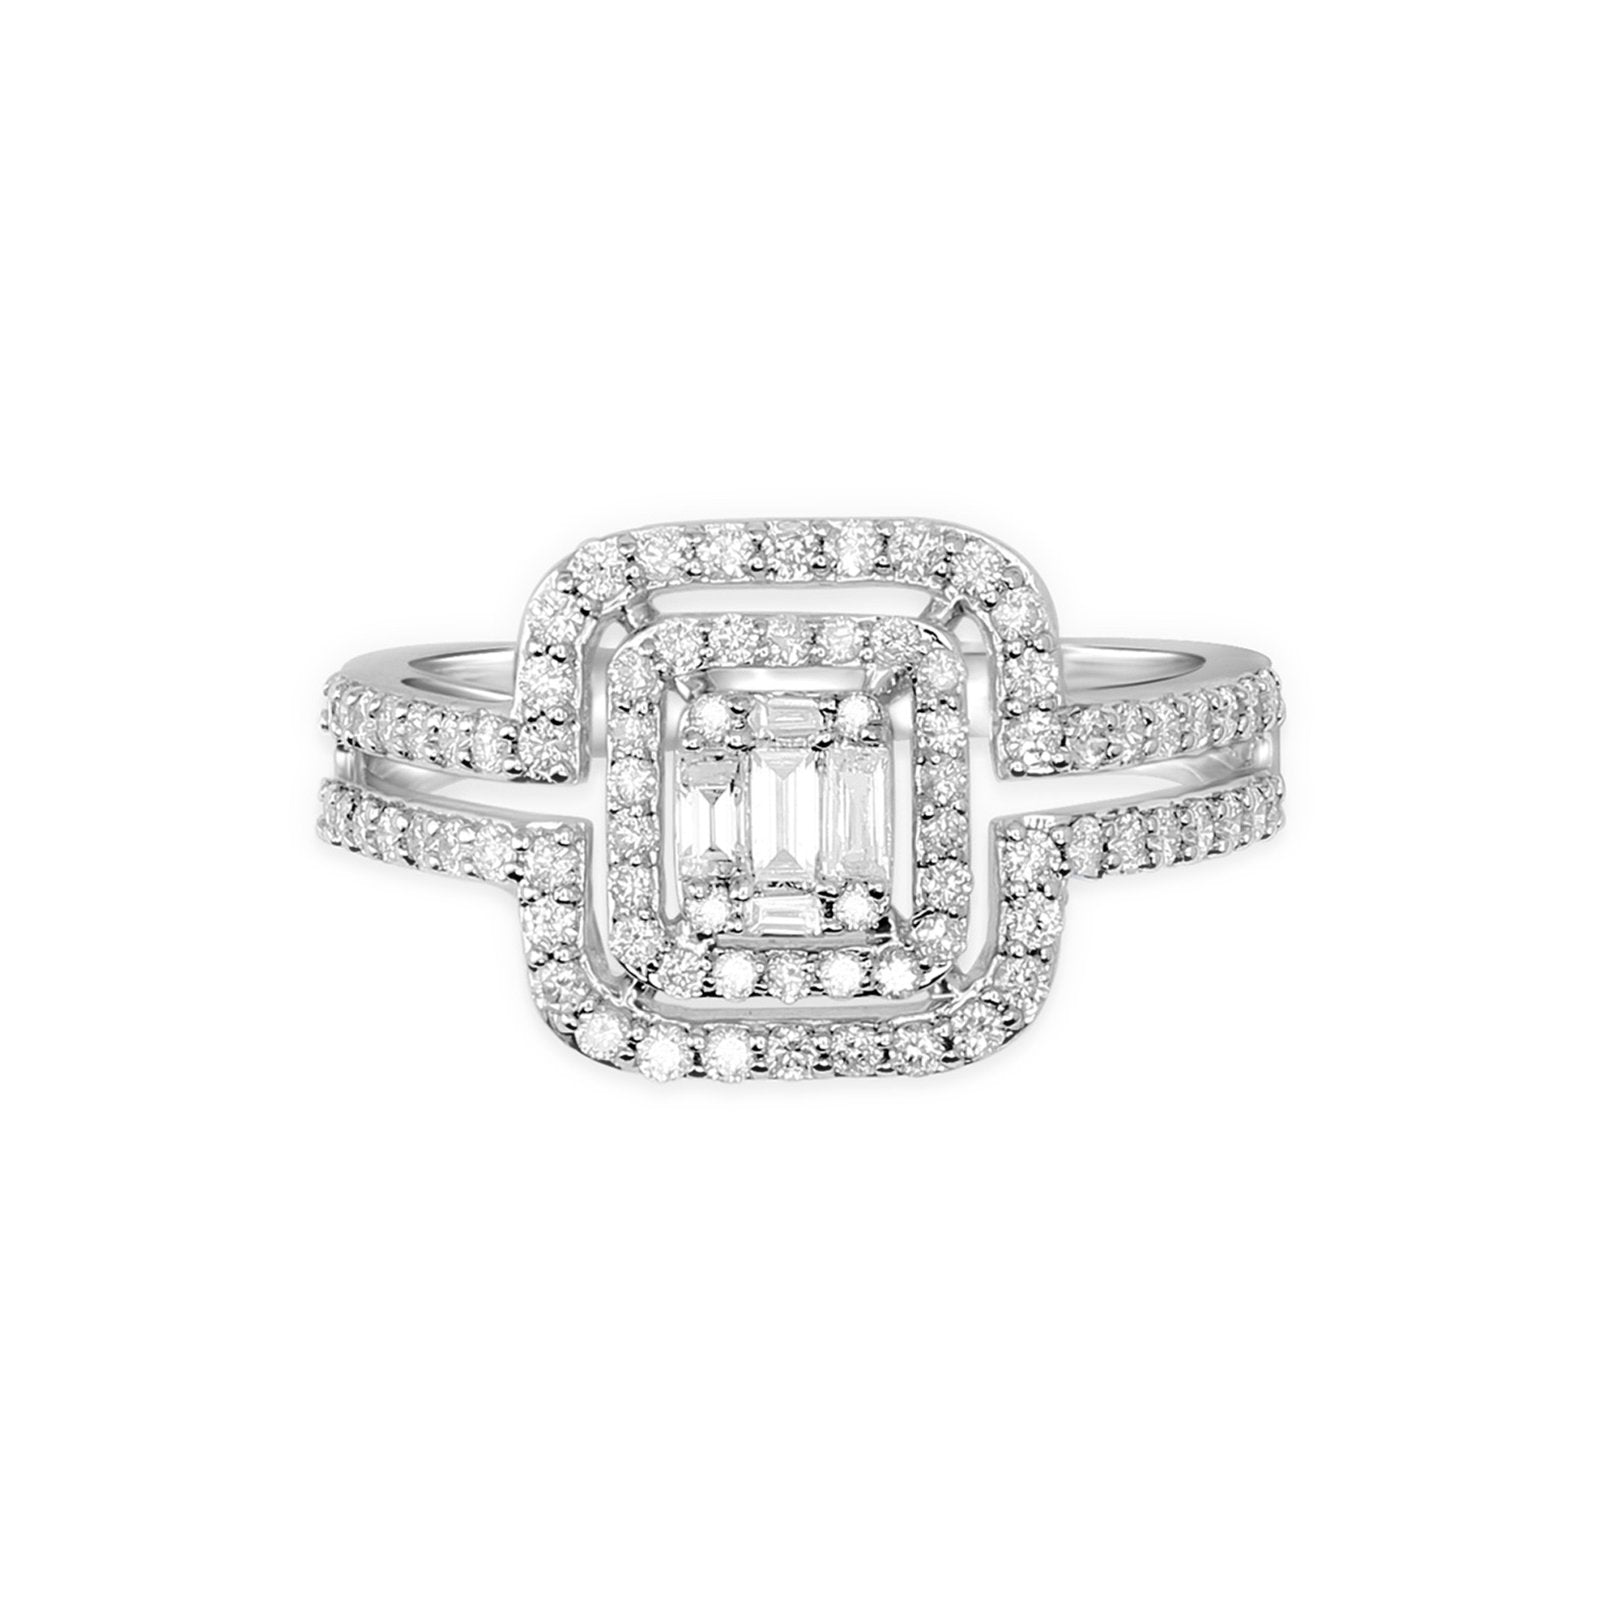 Cushion Cut Diamond with Double Halo Split Shank in Solid 18k White Gold Rings Estella Collection #product_description# 17455 18k Diamond Engagement Ring #tag4# #tag5# #tag6# #tag7# #tag8# #tag9# #tag10# 6